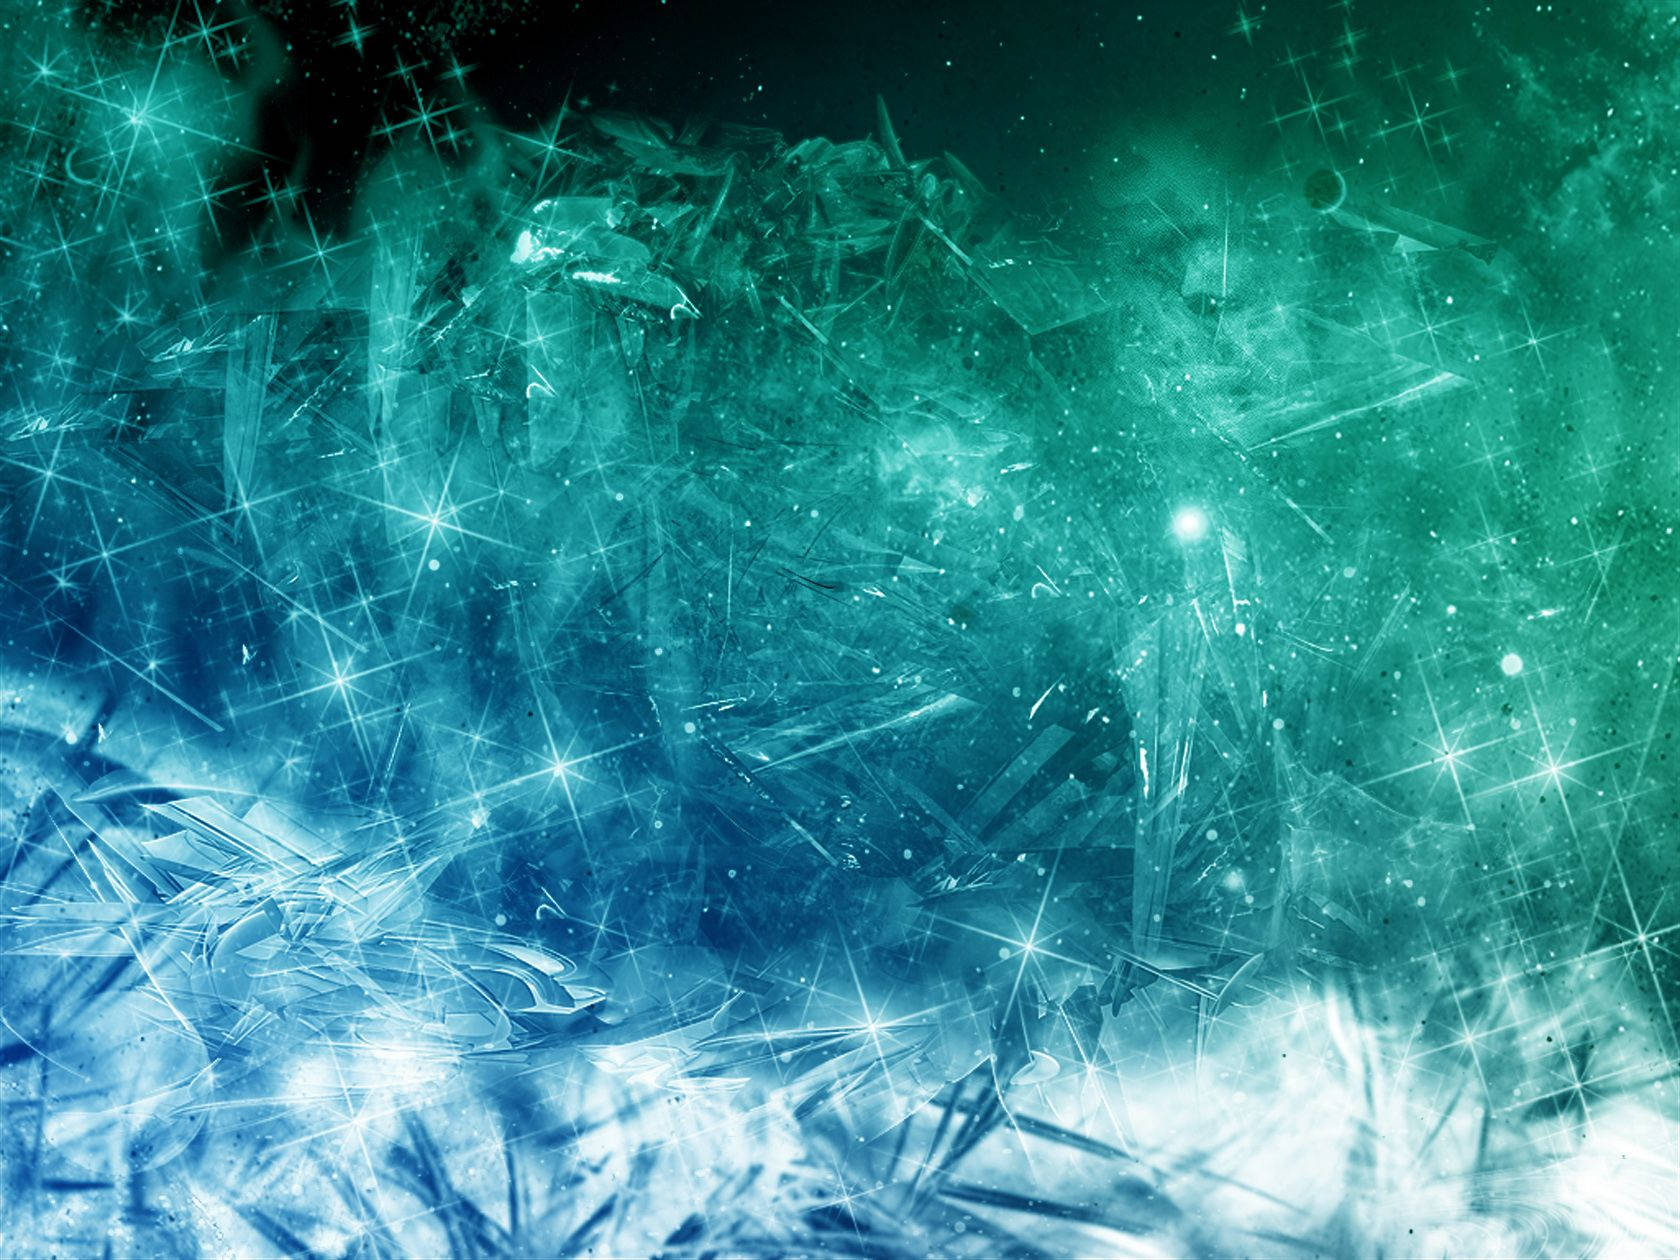 Sparkly Ice Crystals Wallpaper